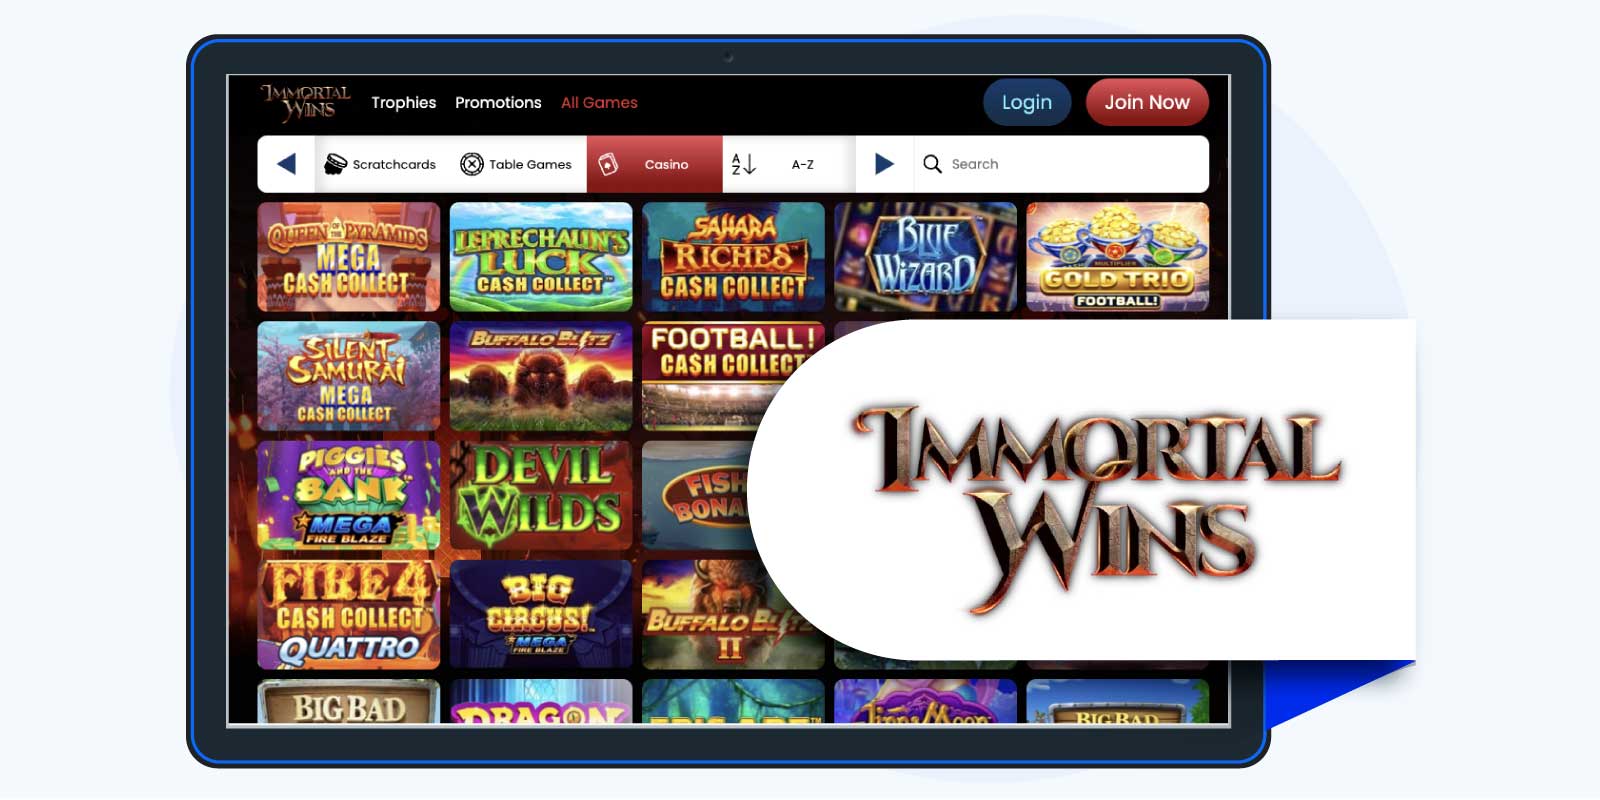 Immortal Wins Casino – 5 free spins no deposit for adding card